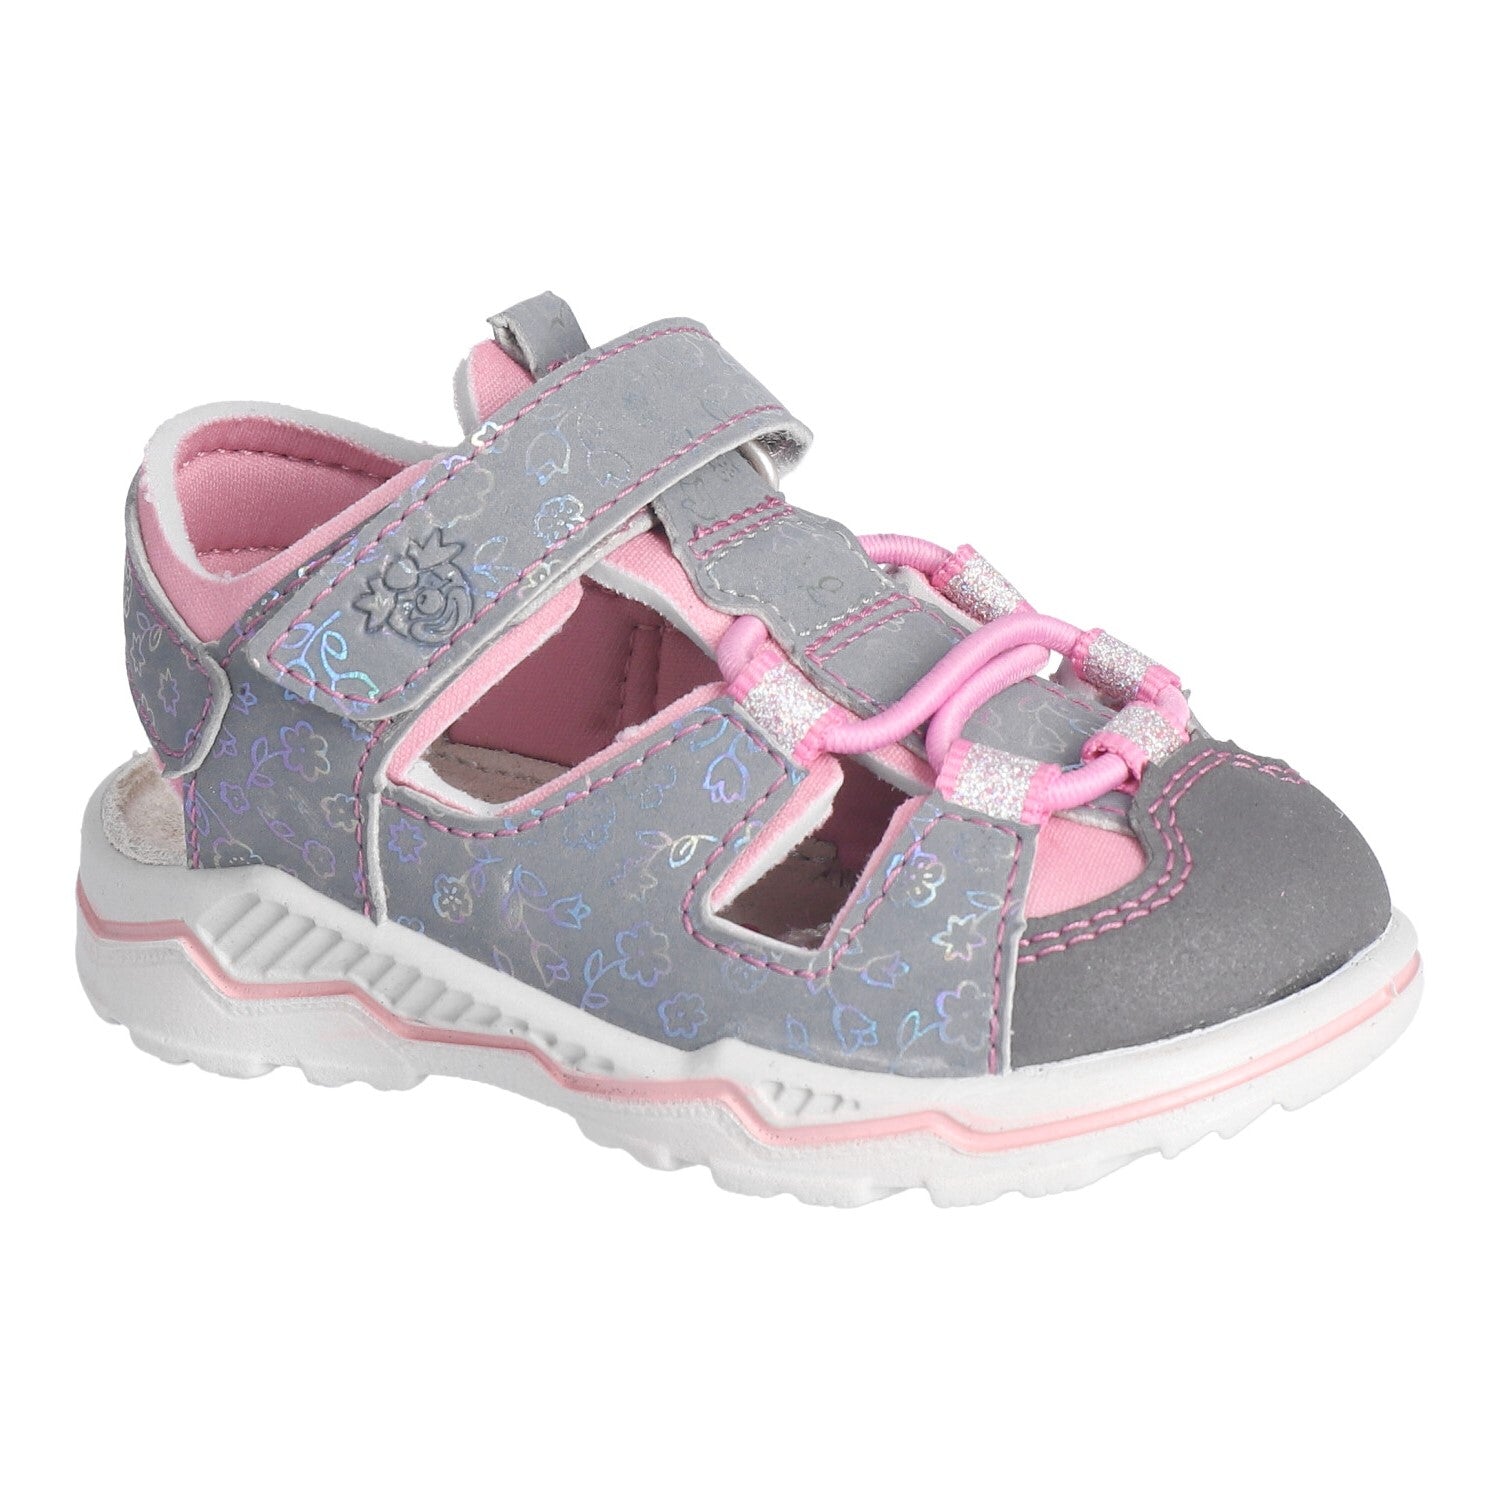 A girls closed toe sandal by Ricosta,style Gery,in grey and pink nubuck with velcro fastening. Right side view.